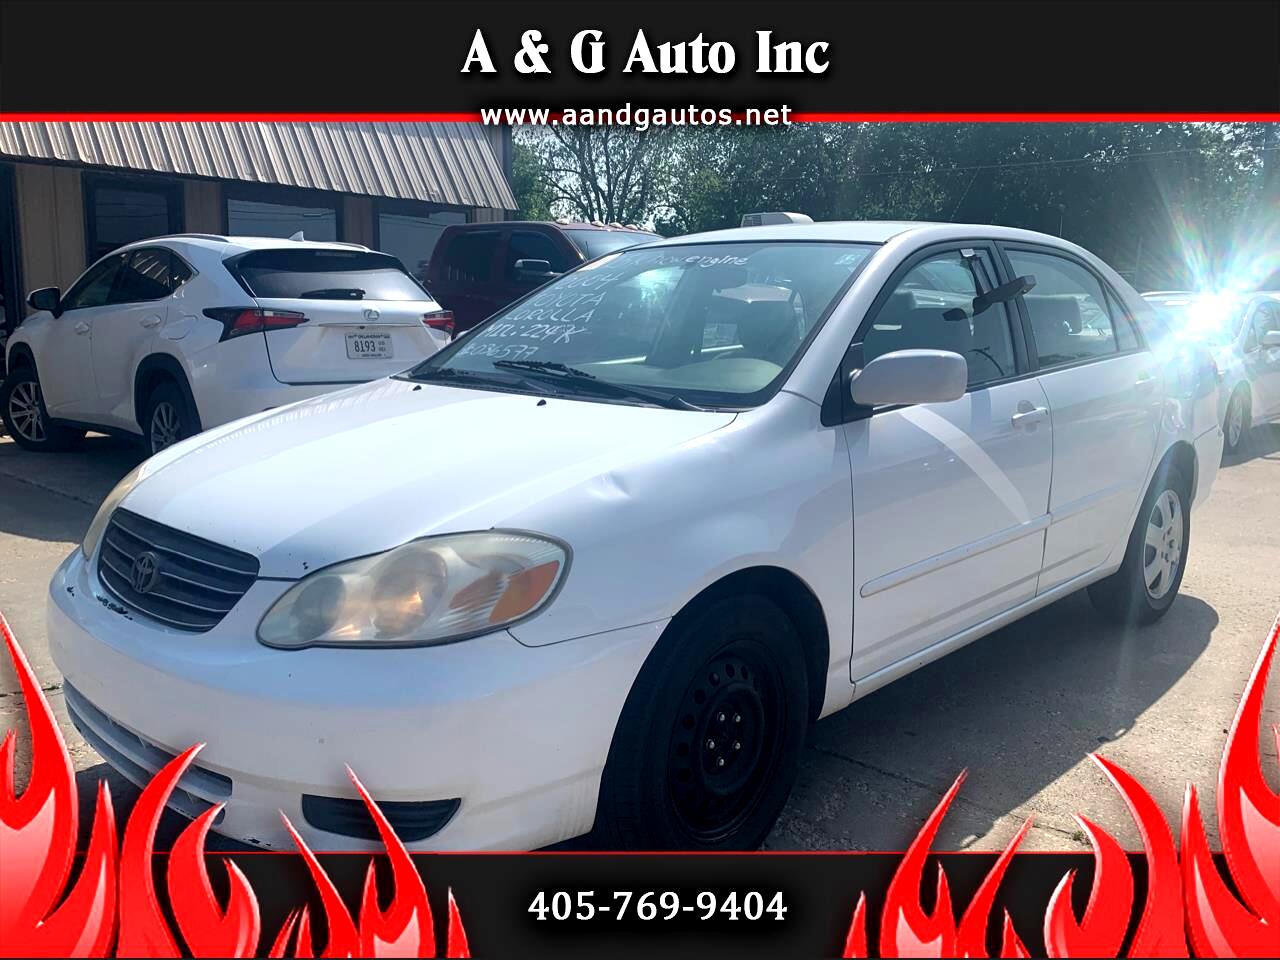 2004 Toyota Corolla for sale in Oklahoma City OK 73141 by A & G Auto Inc